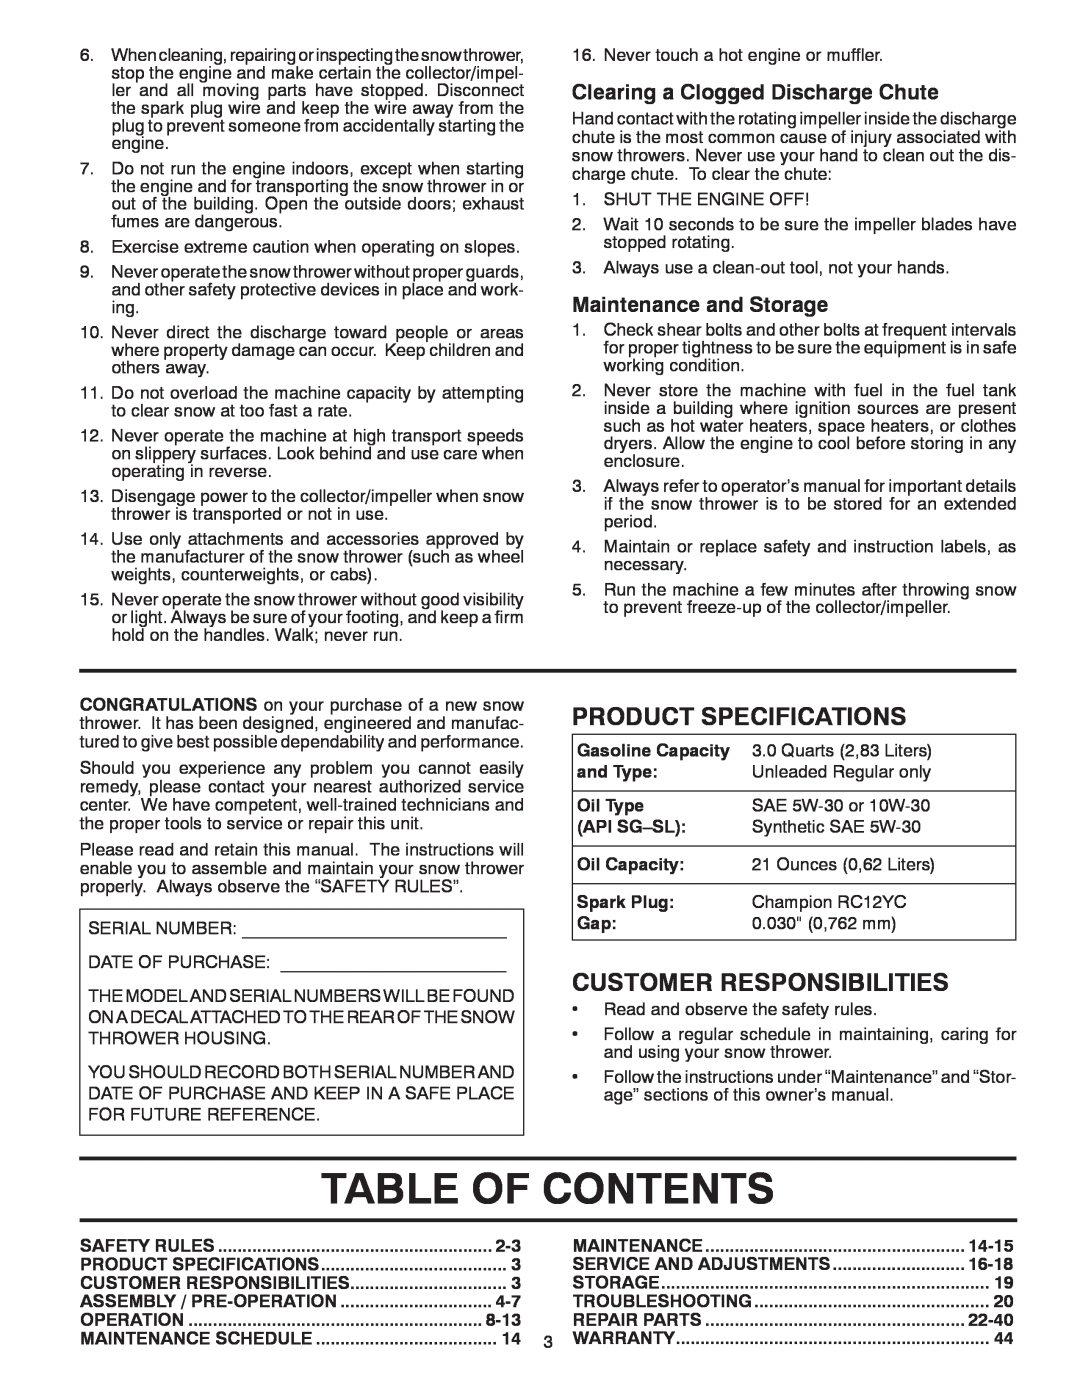 Poulan 96192004300 Table Of Contents, Product Specifications, Customer Responsibilities, Maintenance and Storage, and Type 